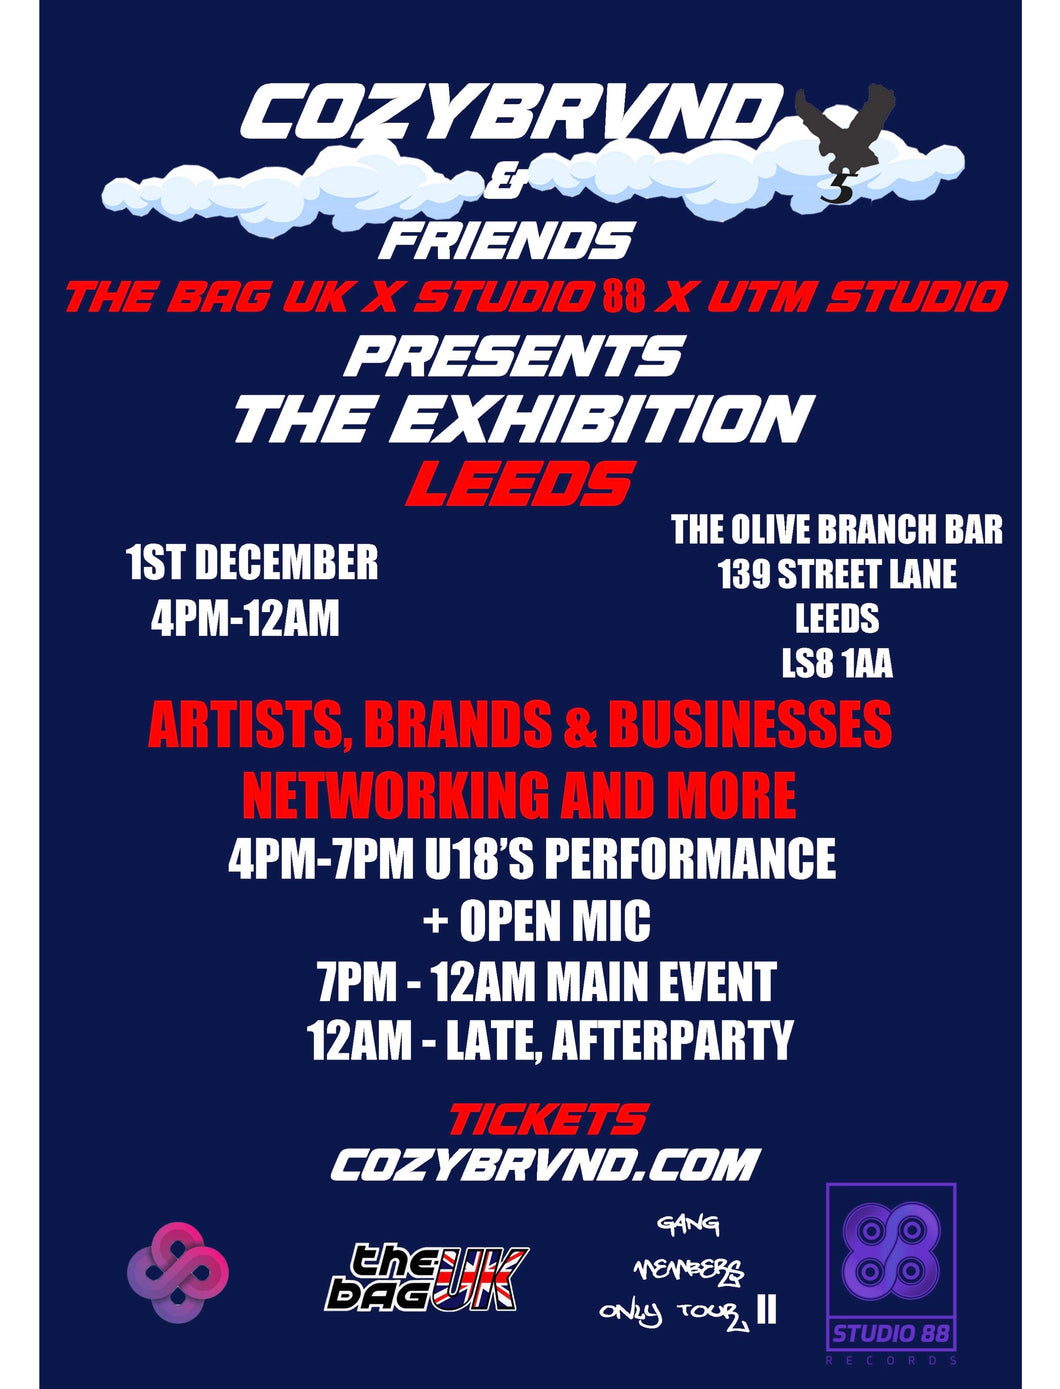 THE EXHIBITION LEEDS  FIRST RELEASE TICKETS